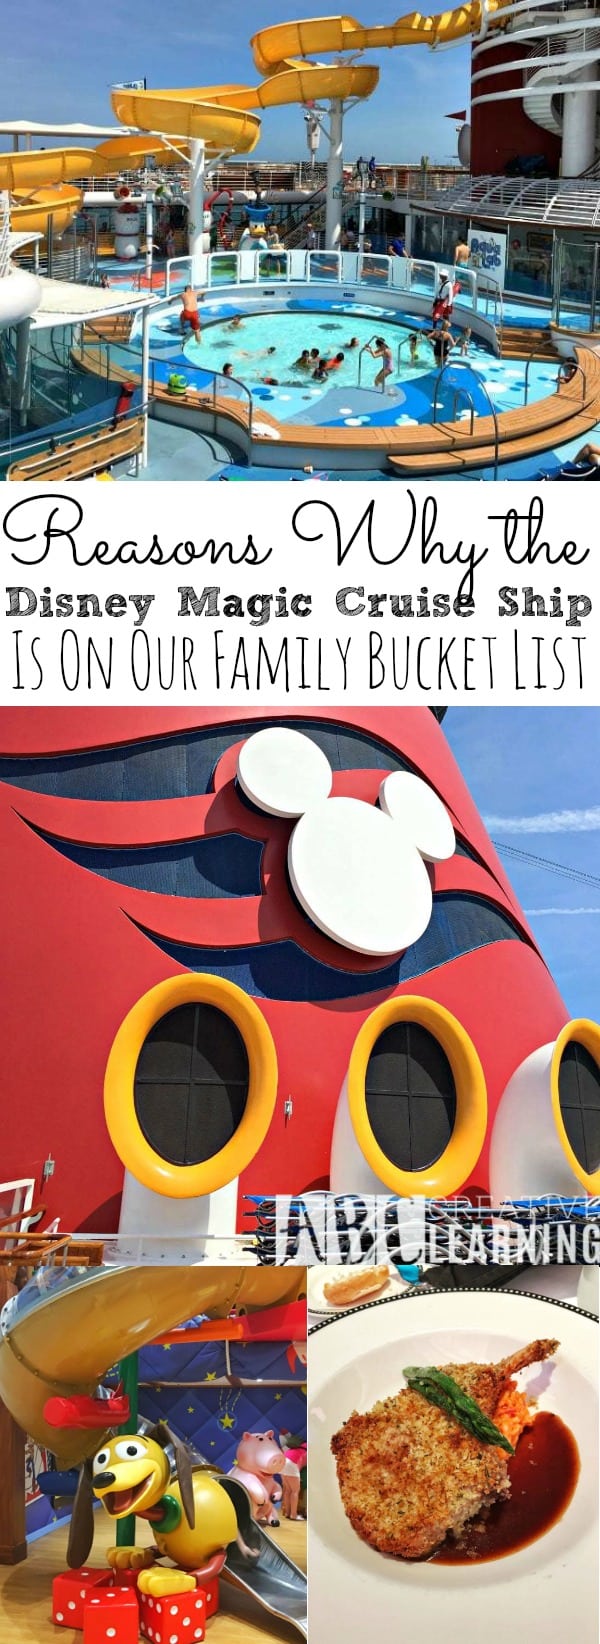 reasons why the Disney Magic Cruise Ship is on our family bucket list